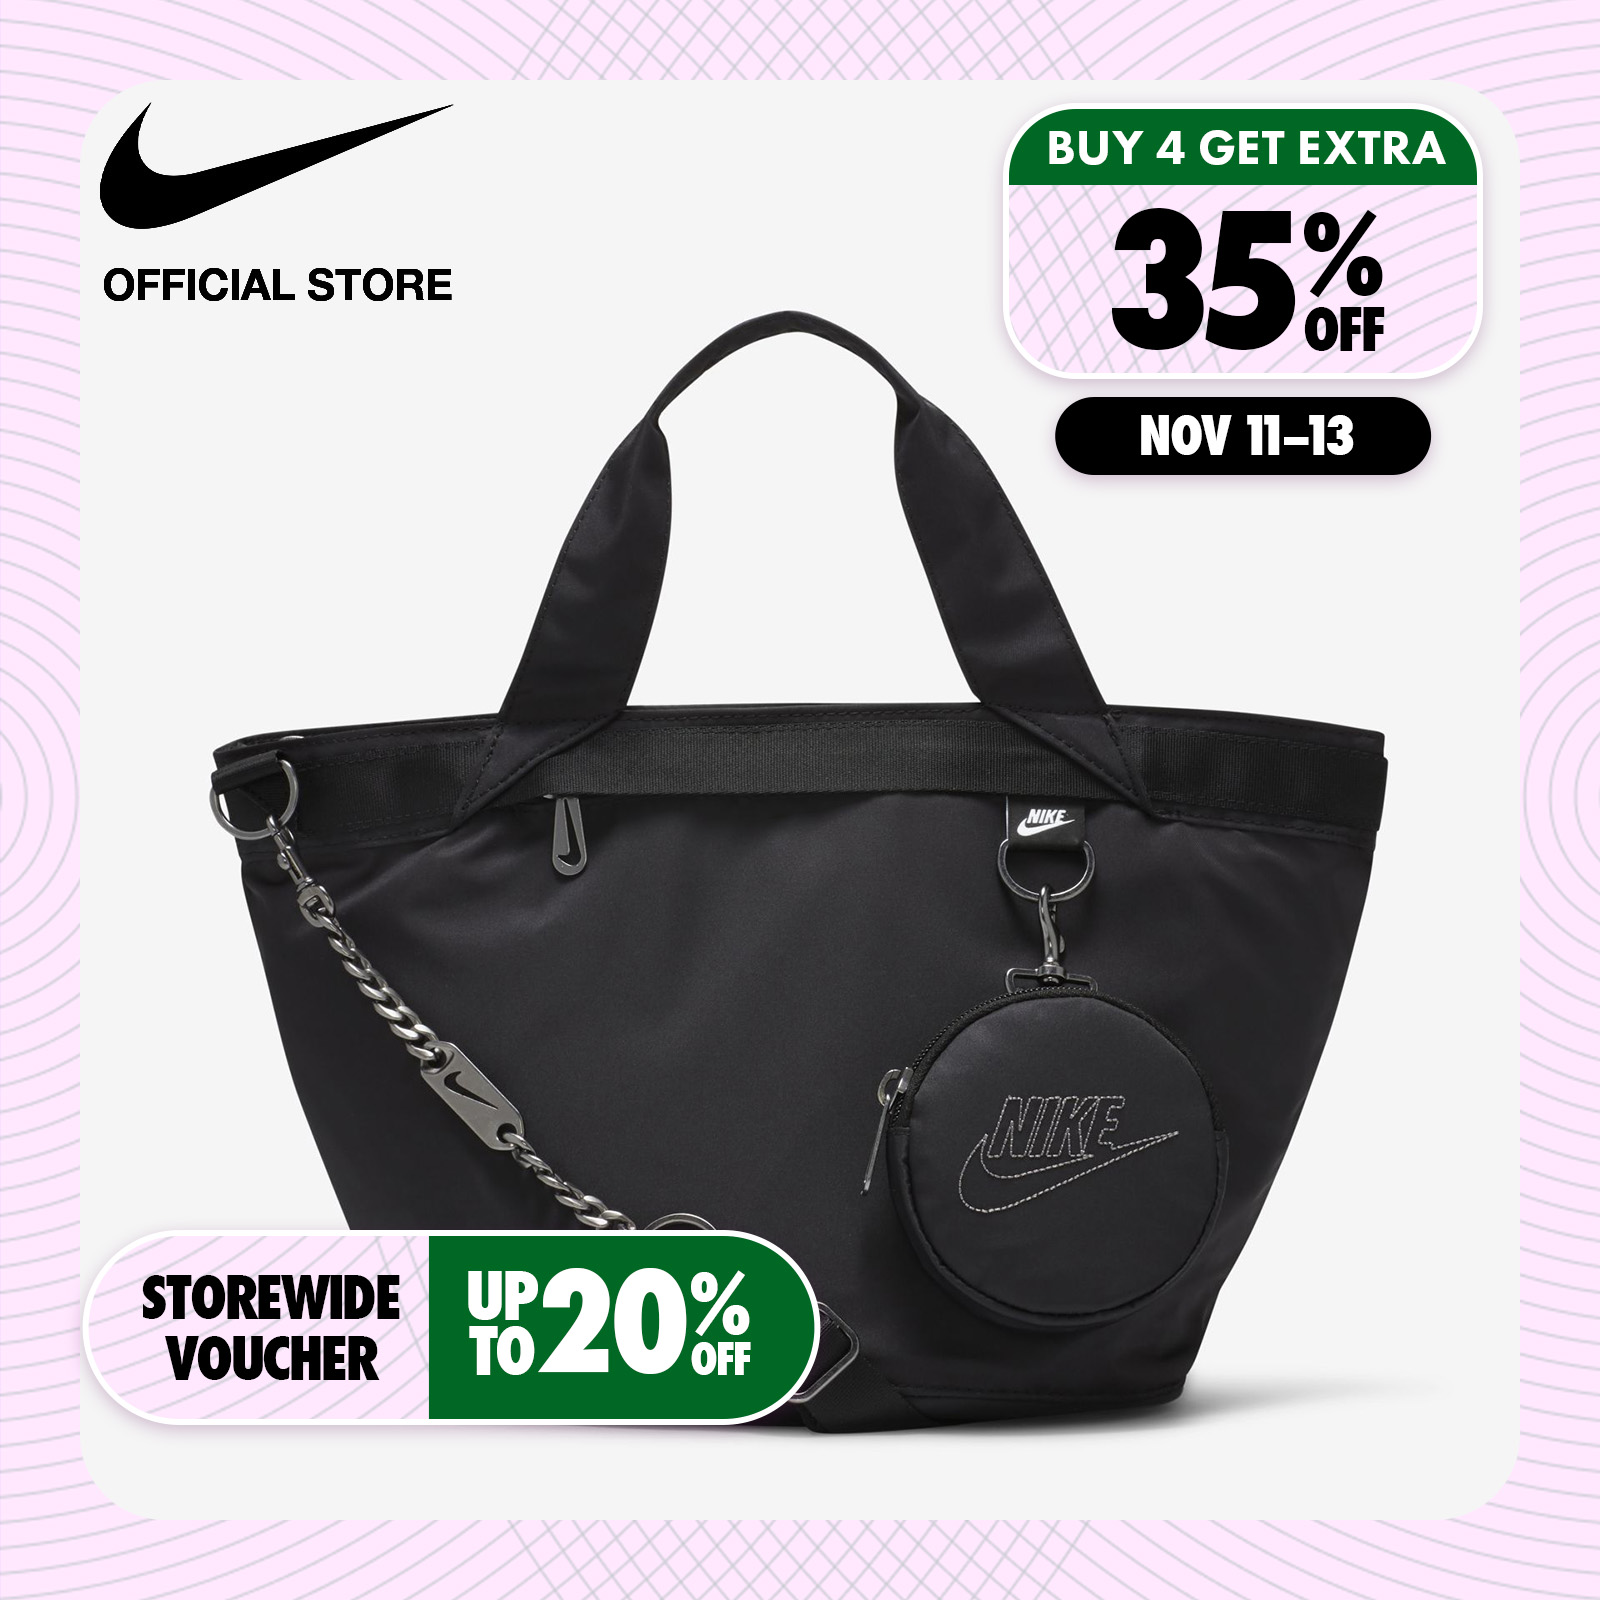 Nike Women's One Luxe Training Bag Sale on Lazada